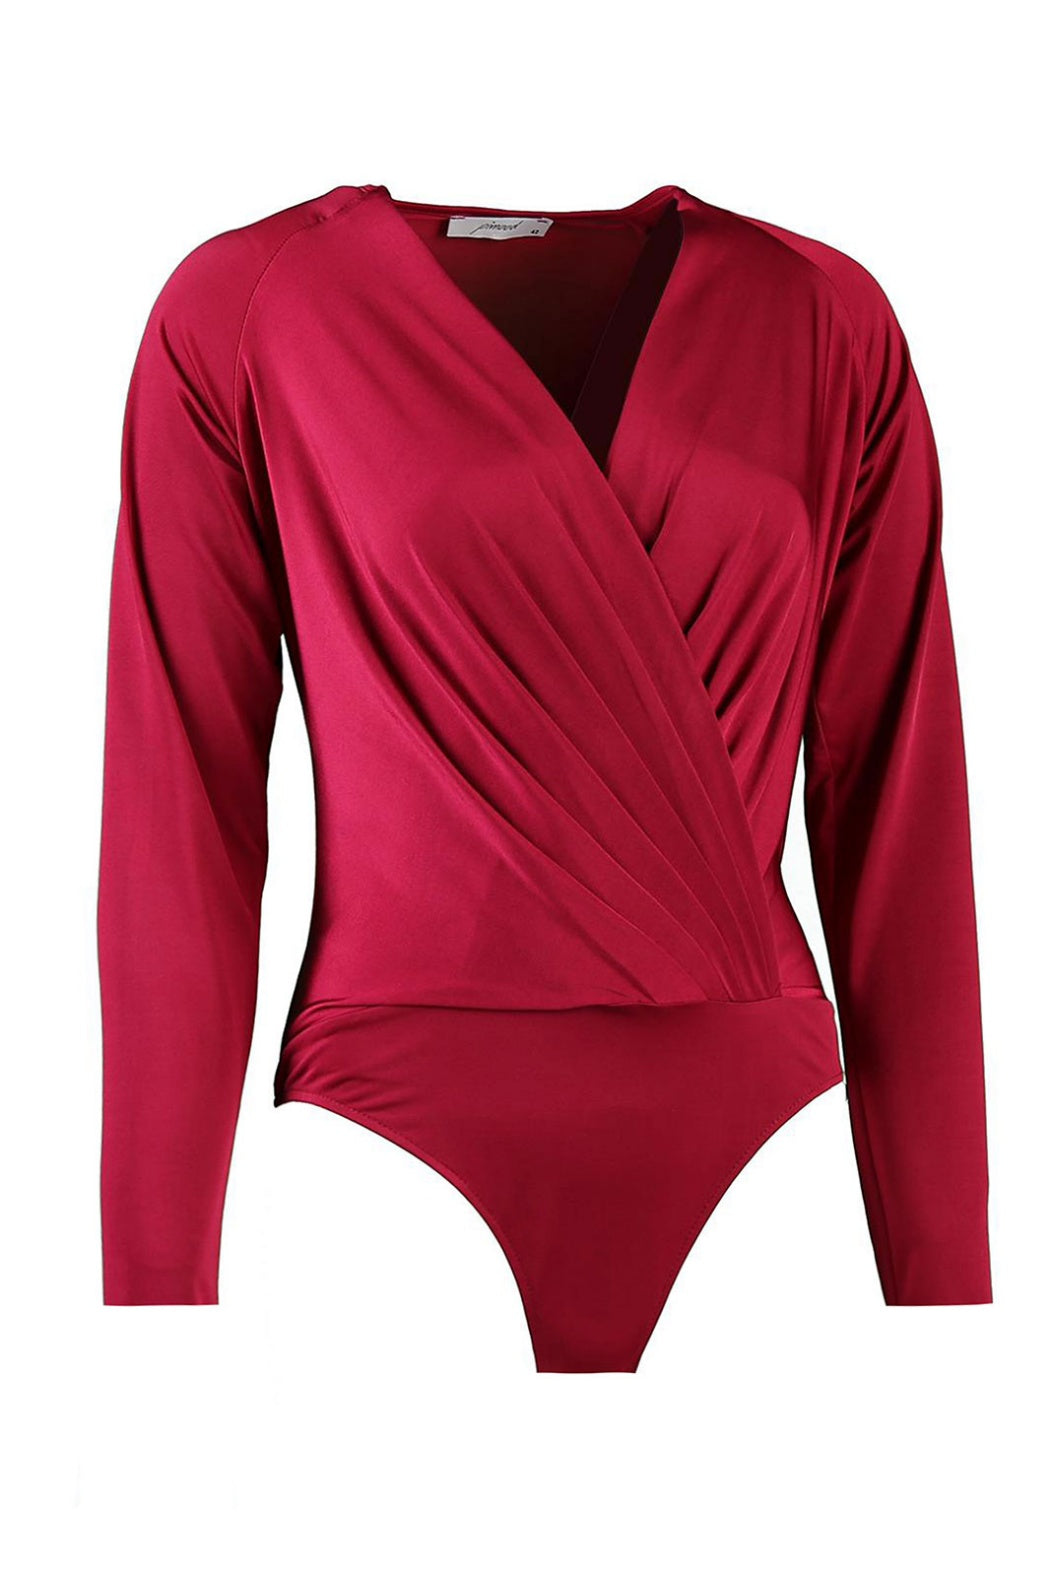 Carol Claret Red Double Breasted Neck Long Sleeve Bodysuit